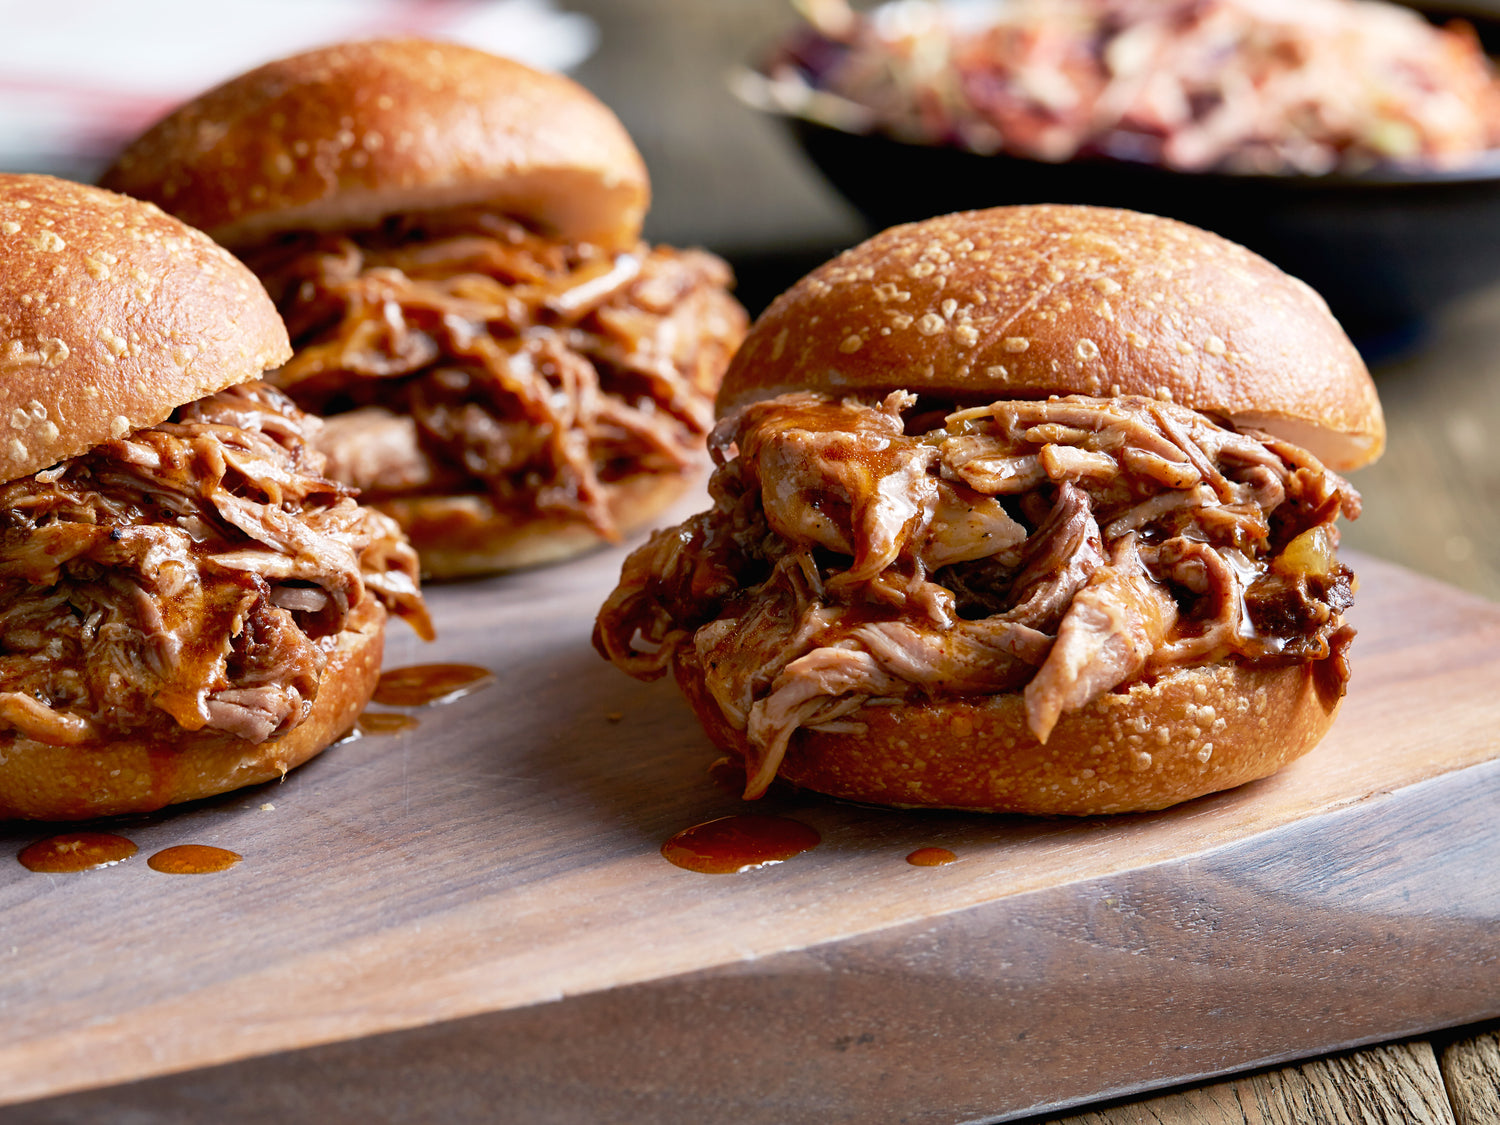 delicious pulled pork locally made ready to eat on a bun Winnipeg Manitoba catering